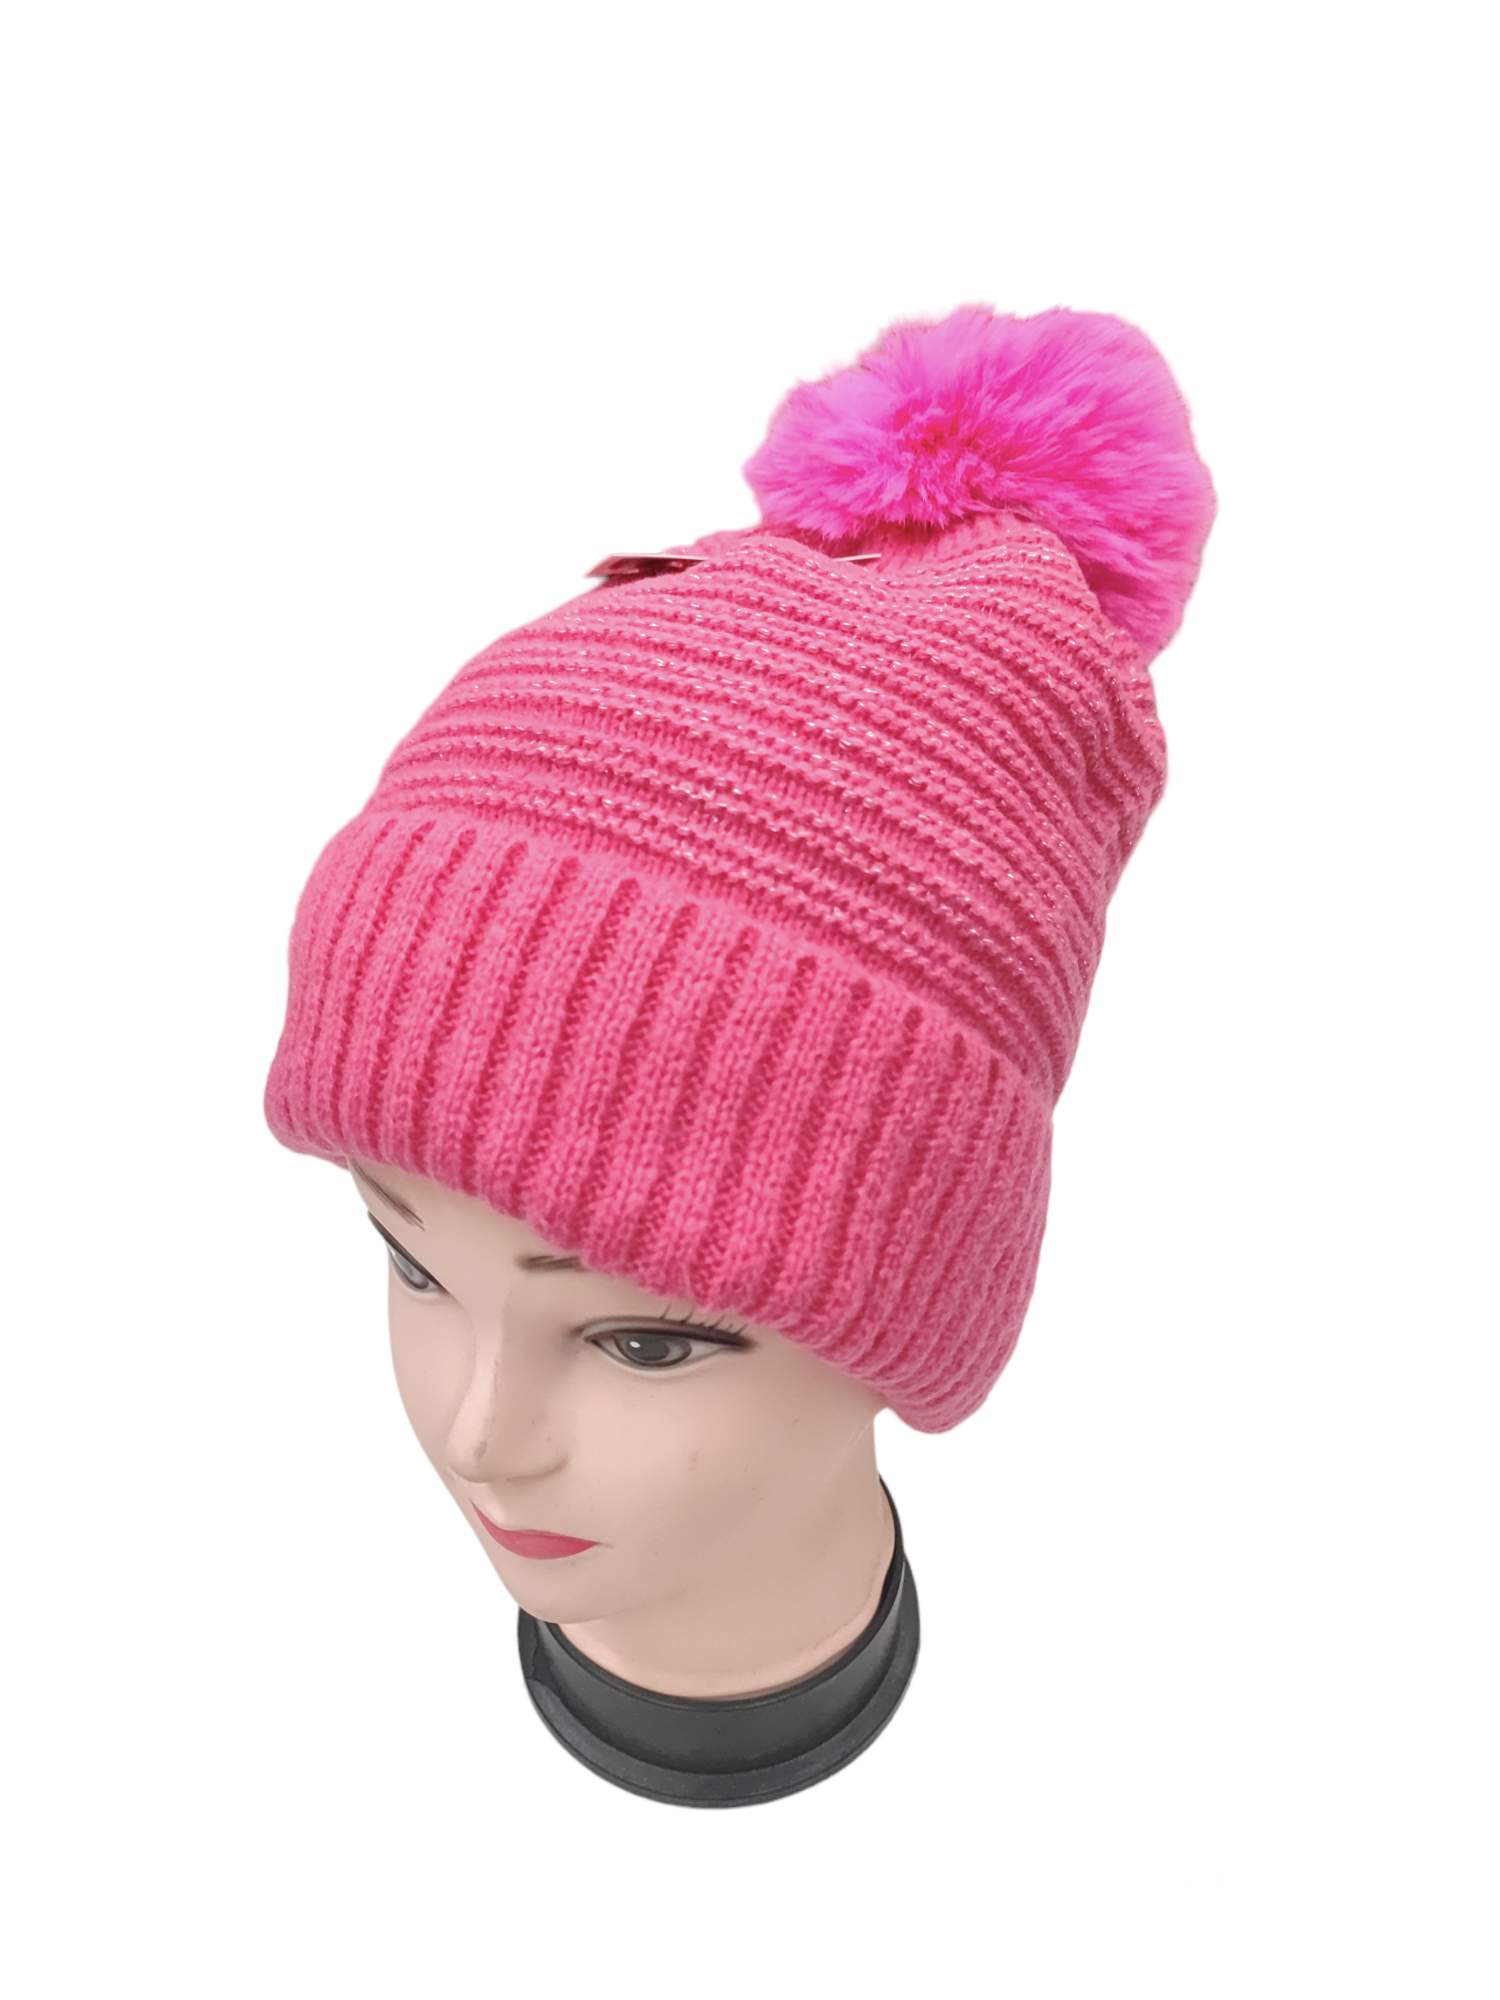 Women's hat with pompom filling (x12) #1